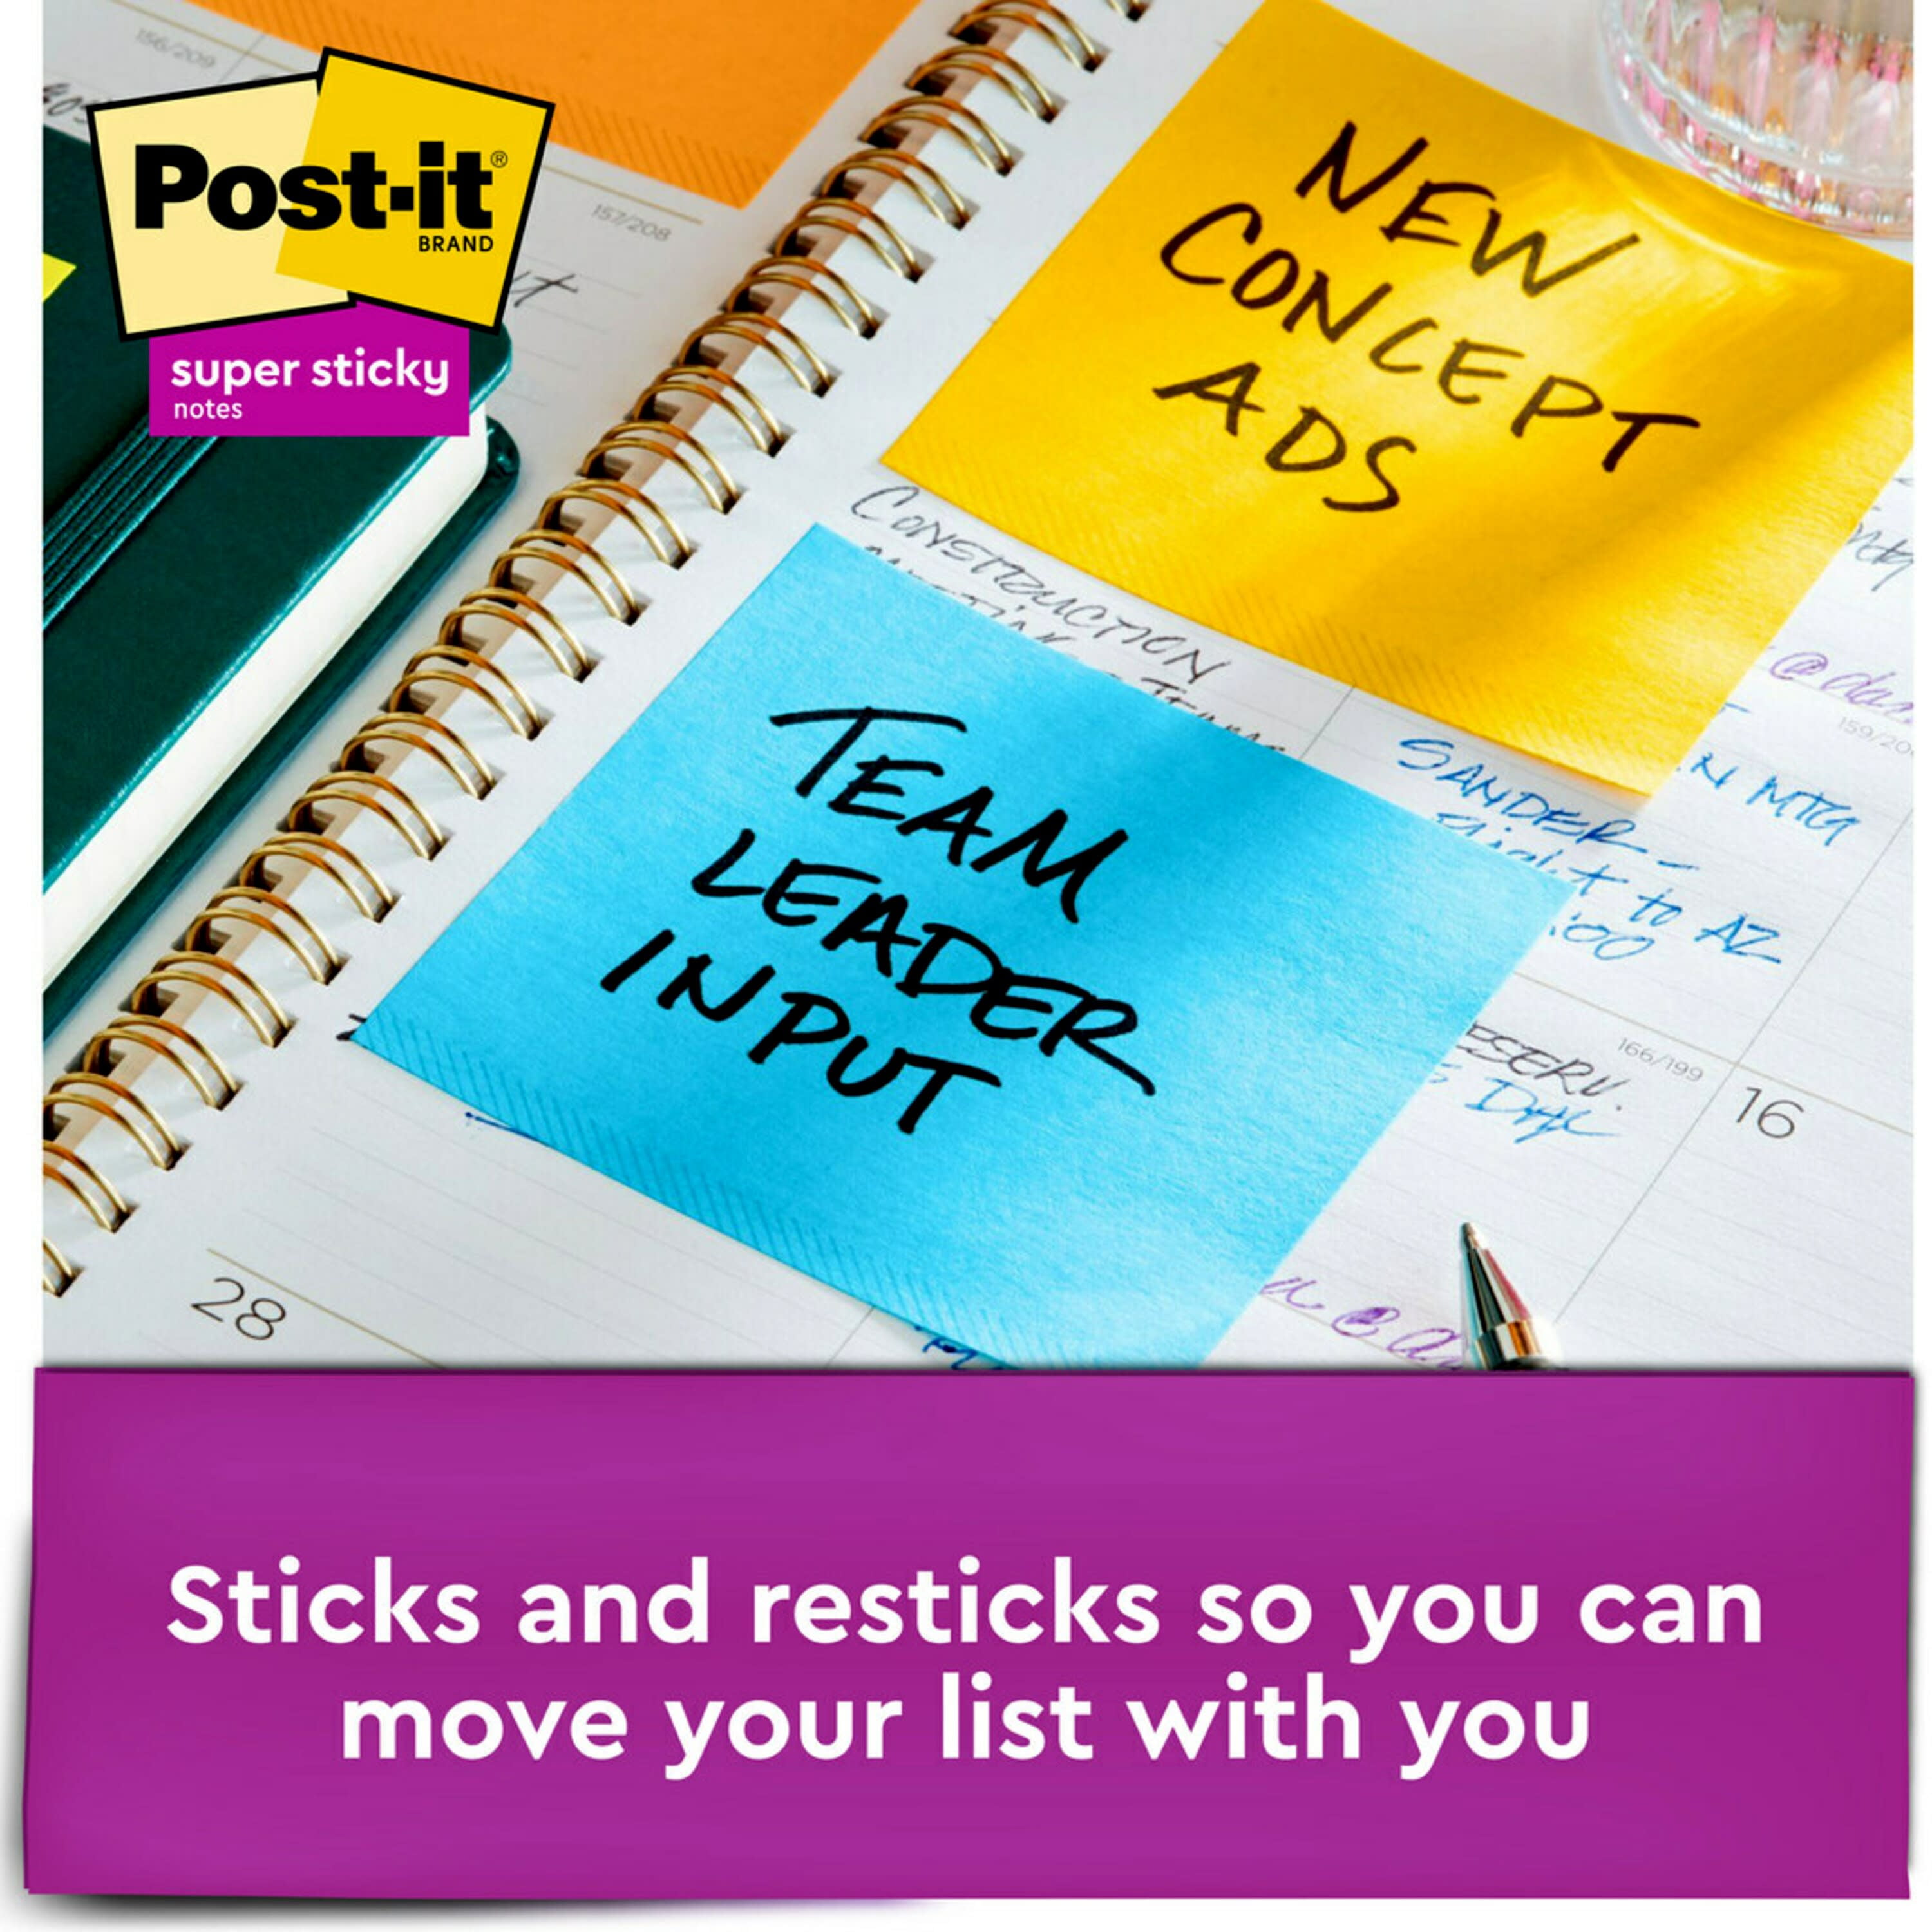  Post-it Super Sticky Full Stick Notes, 3x3 in, 12 Pads, 2x the  Sticking Power, Energy Boost Collection, Bright Colors (Orange, Pink, Blue,  Green), Recyclable (F330-12SSAU) : Office Products